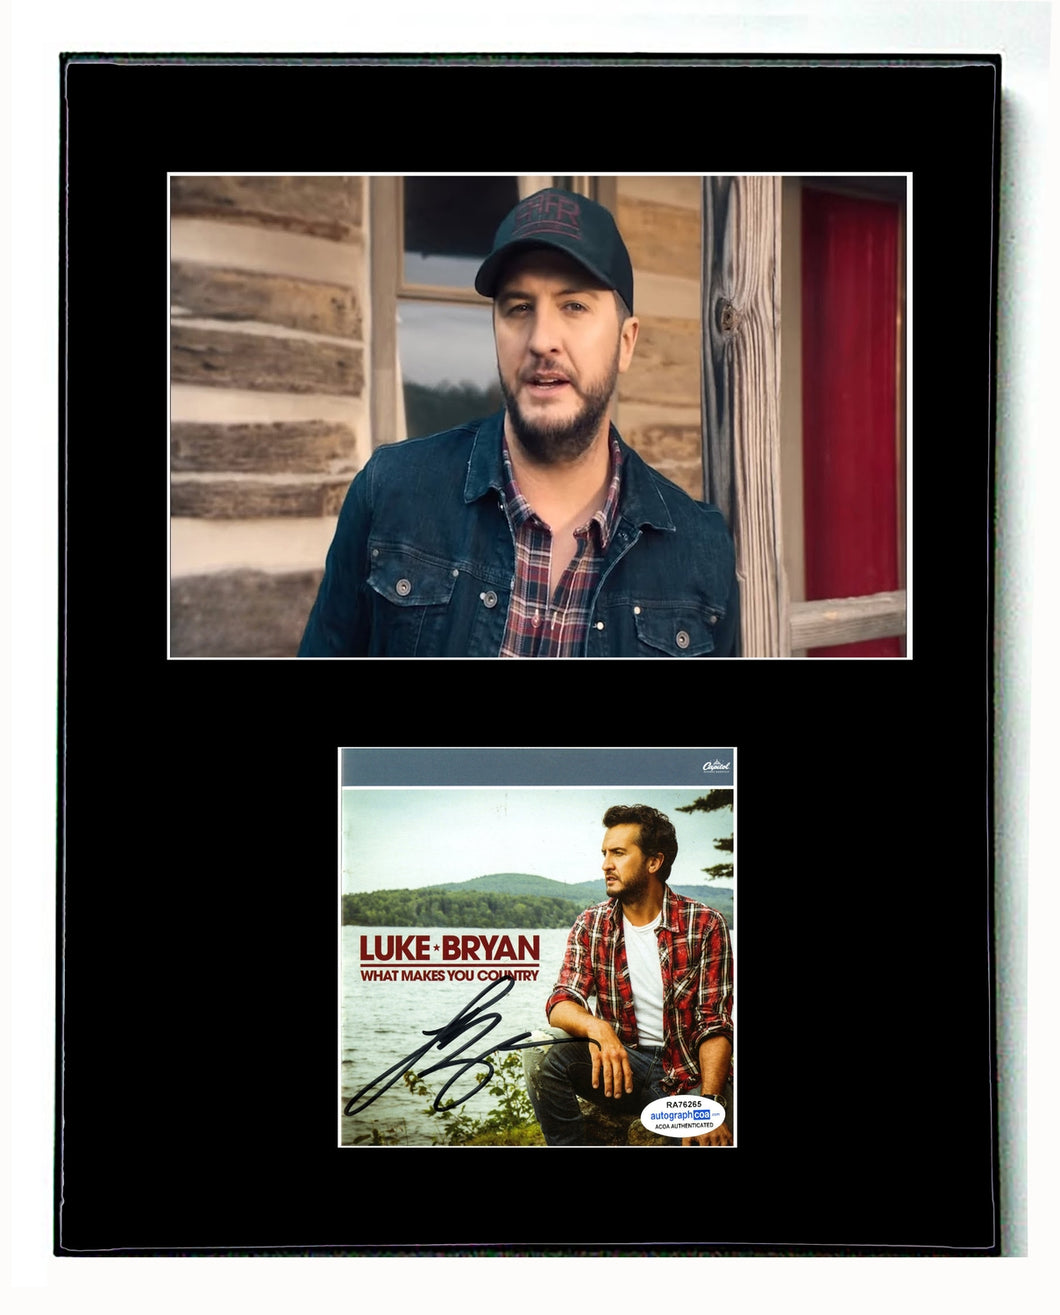 Luke Bryan Autographed Signed 11x14 Framed Display CD Cover Photo